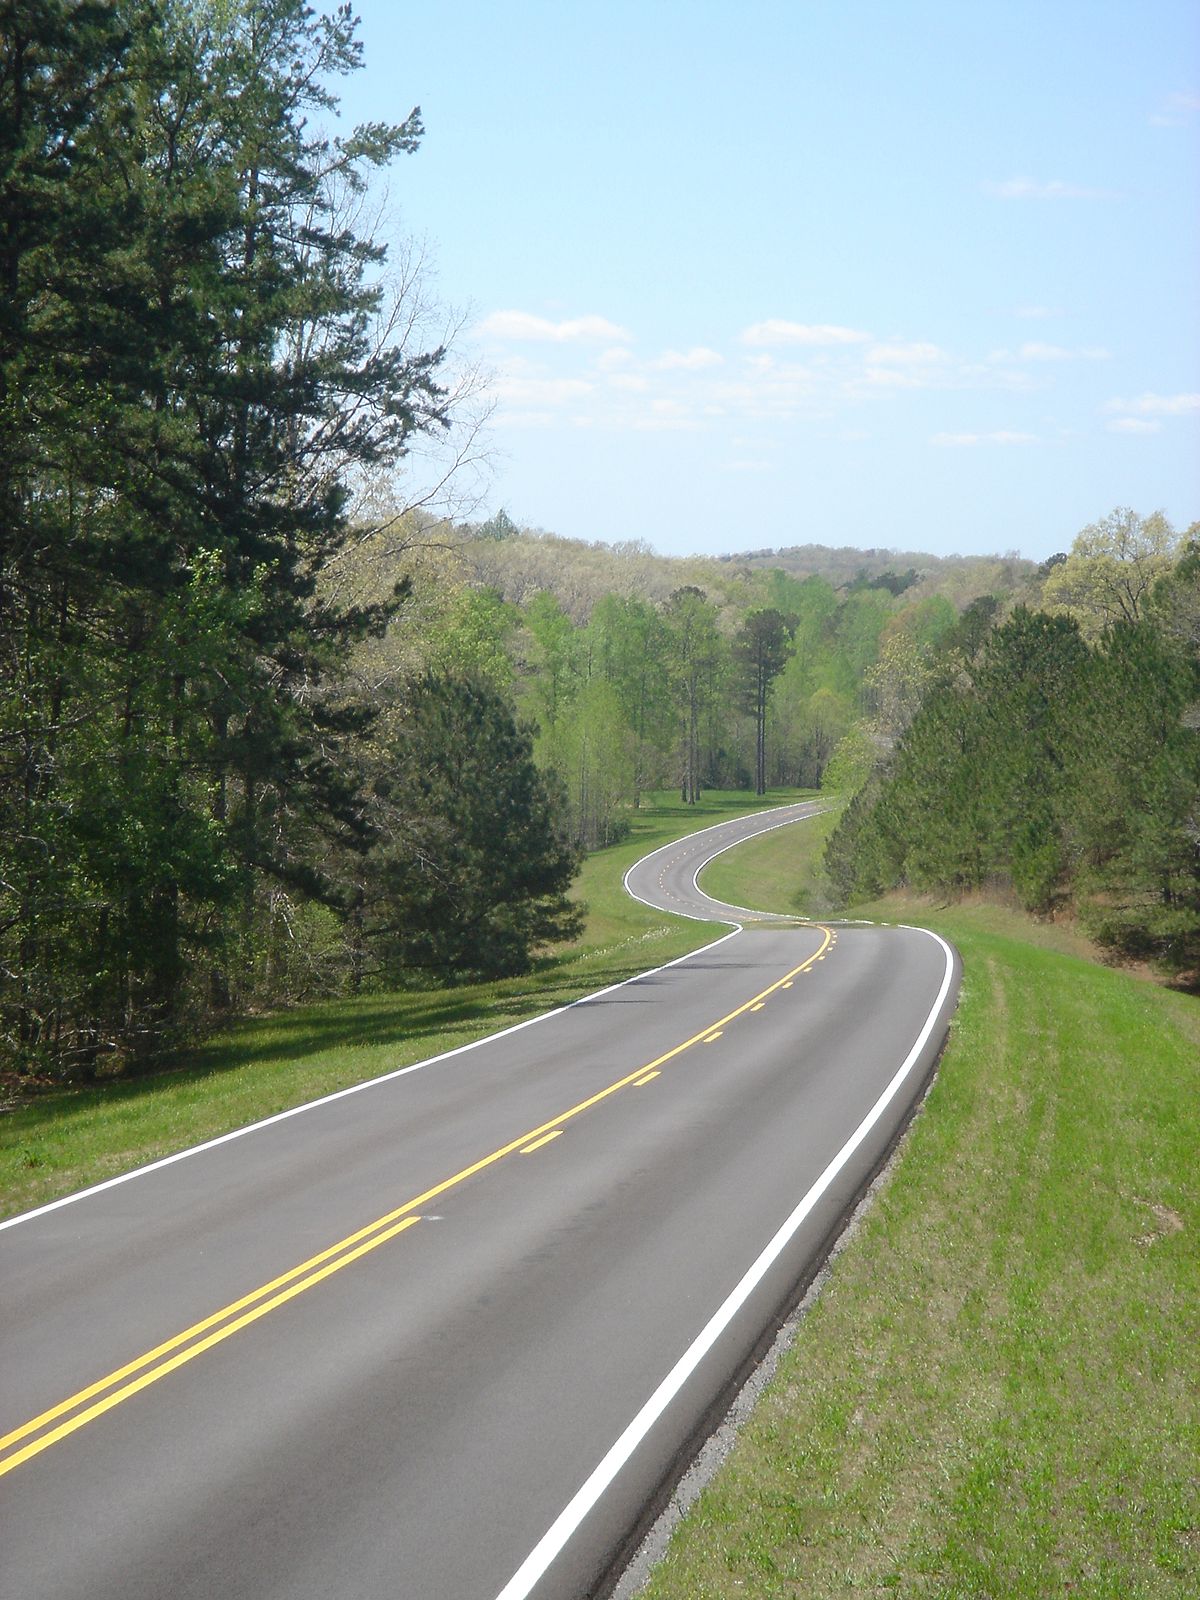 Natchez Trace Parkway – Travel guide at Wikivoyage